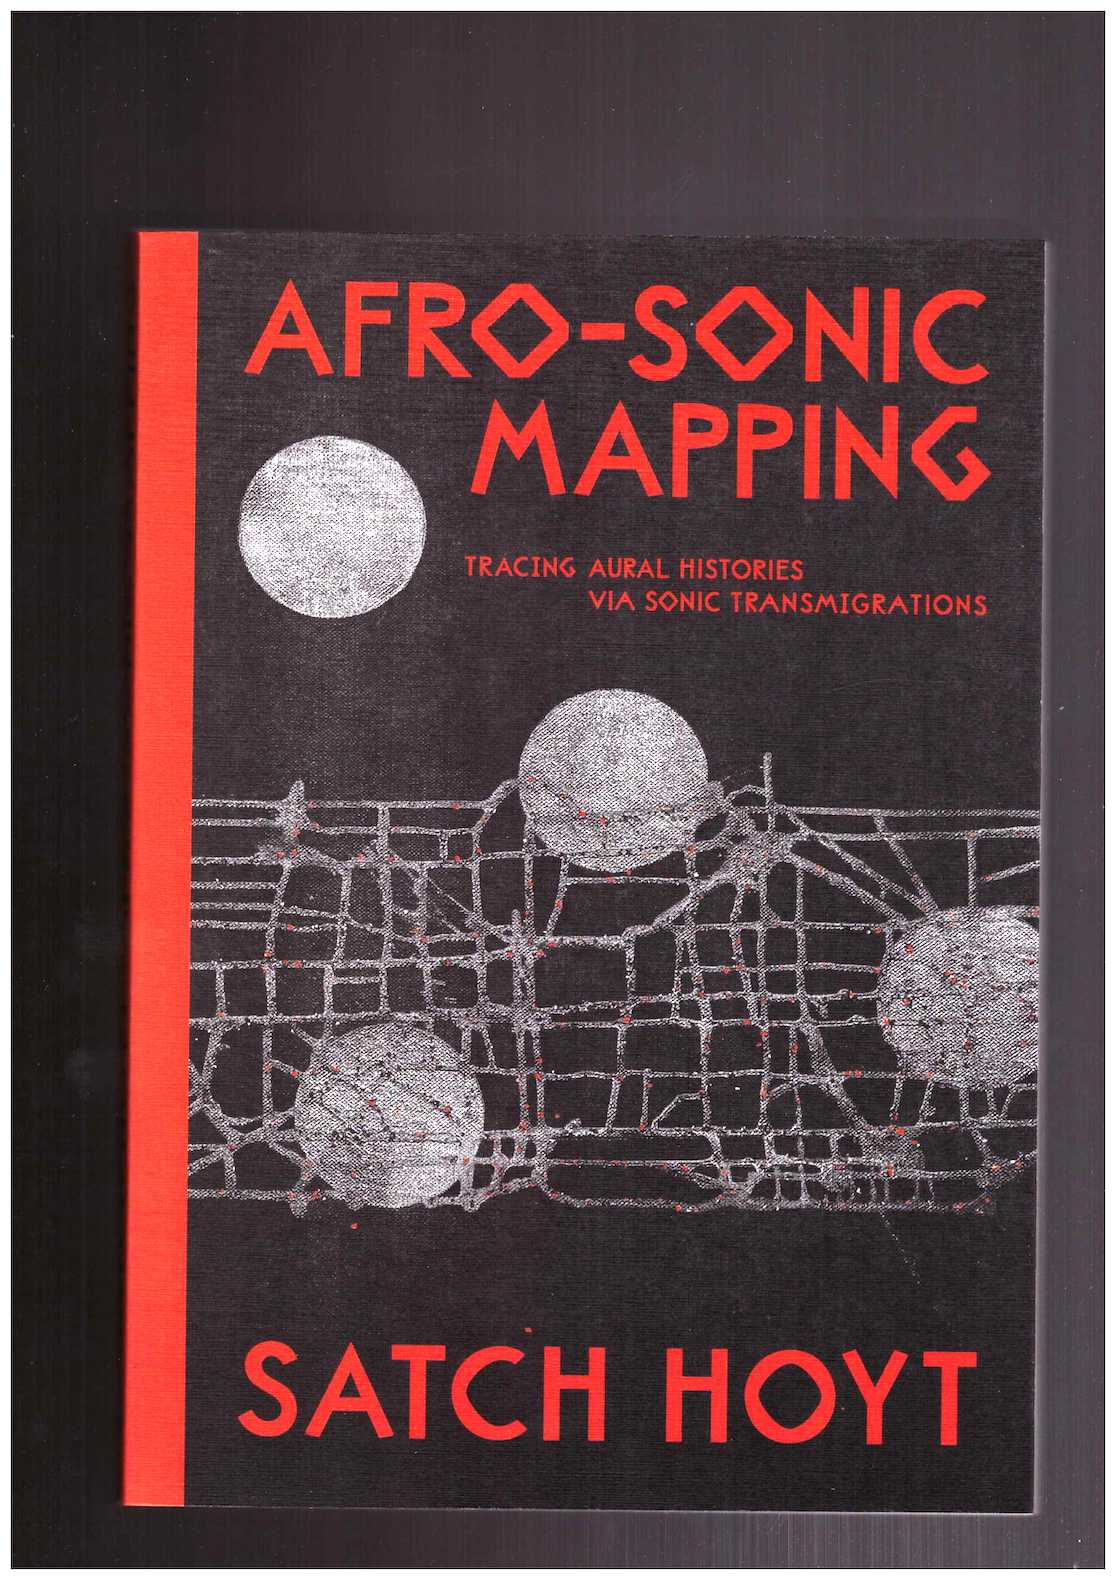 HOYT, Satch; GUEVARA, Paz (ed.) - Afro-Sonic Mapping